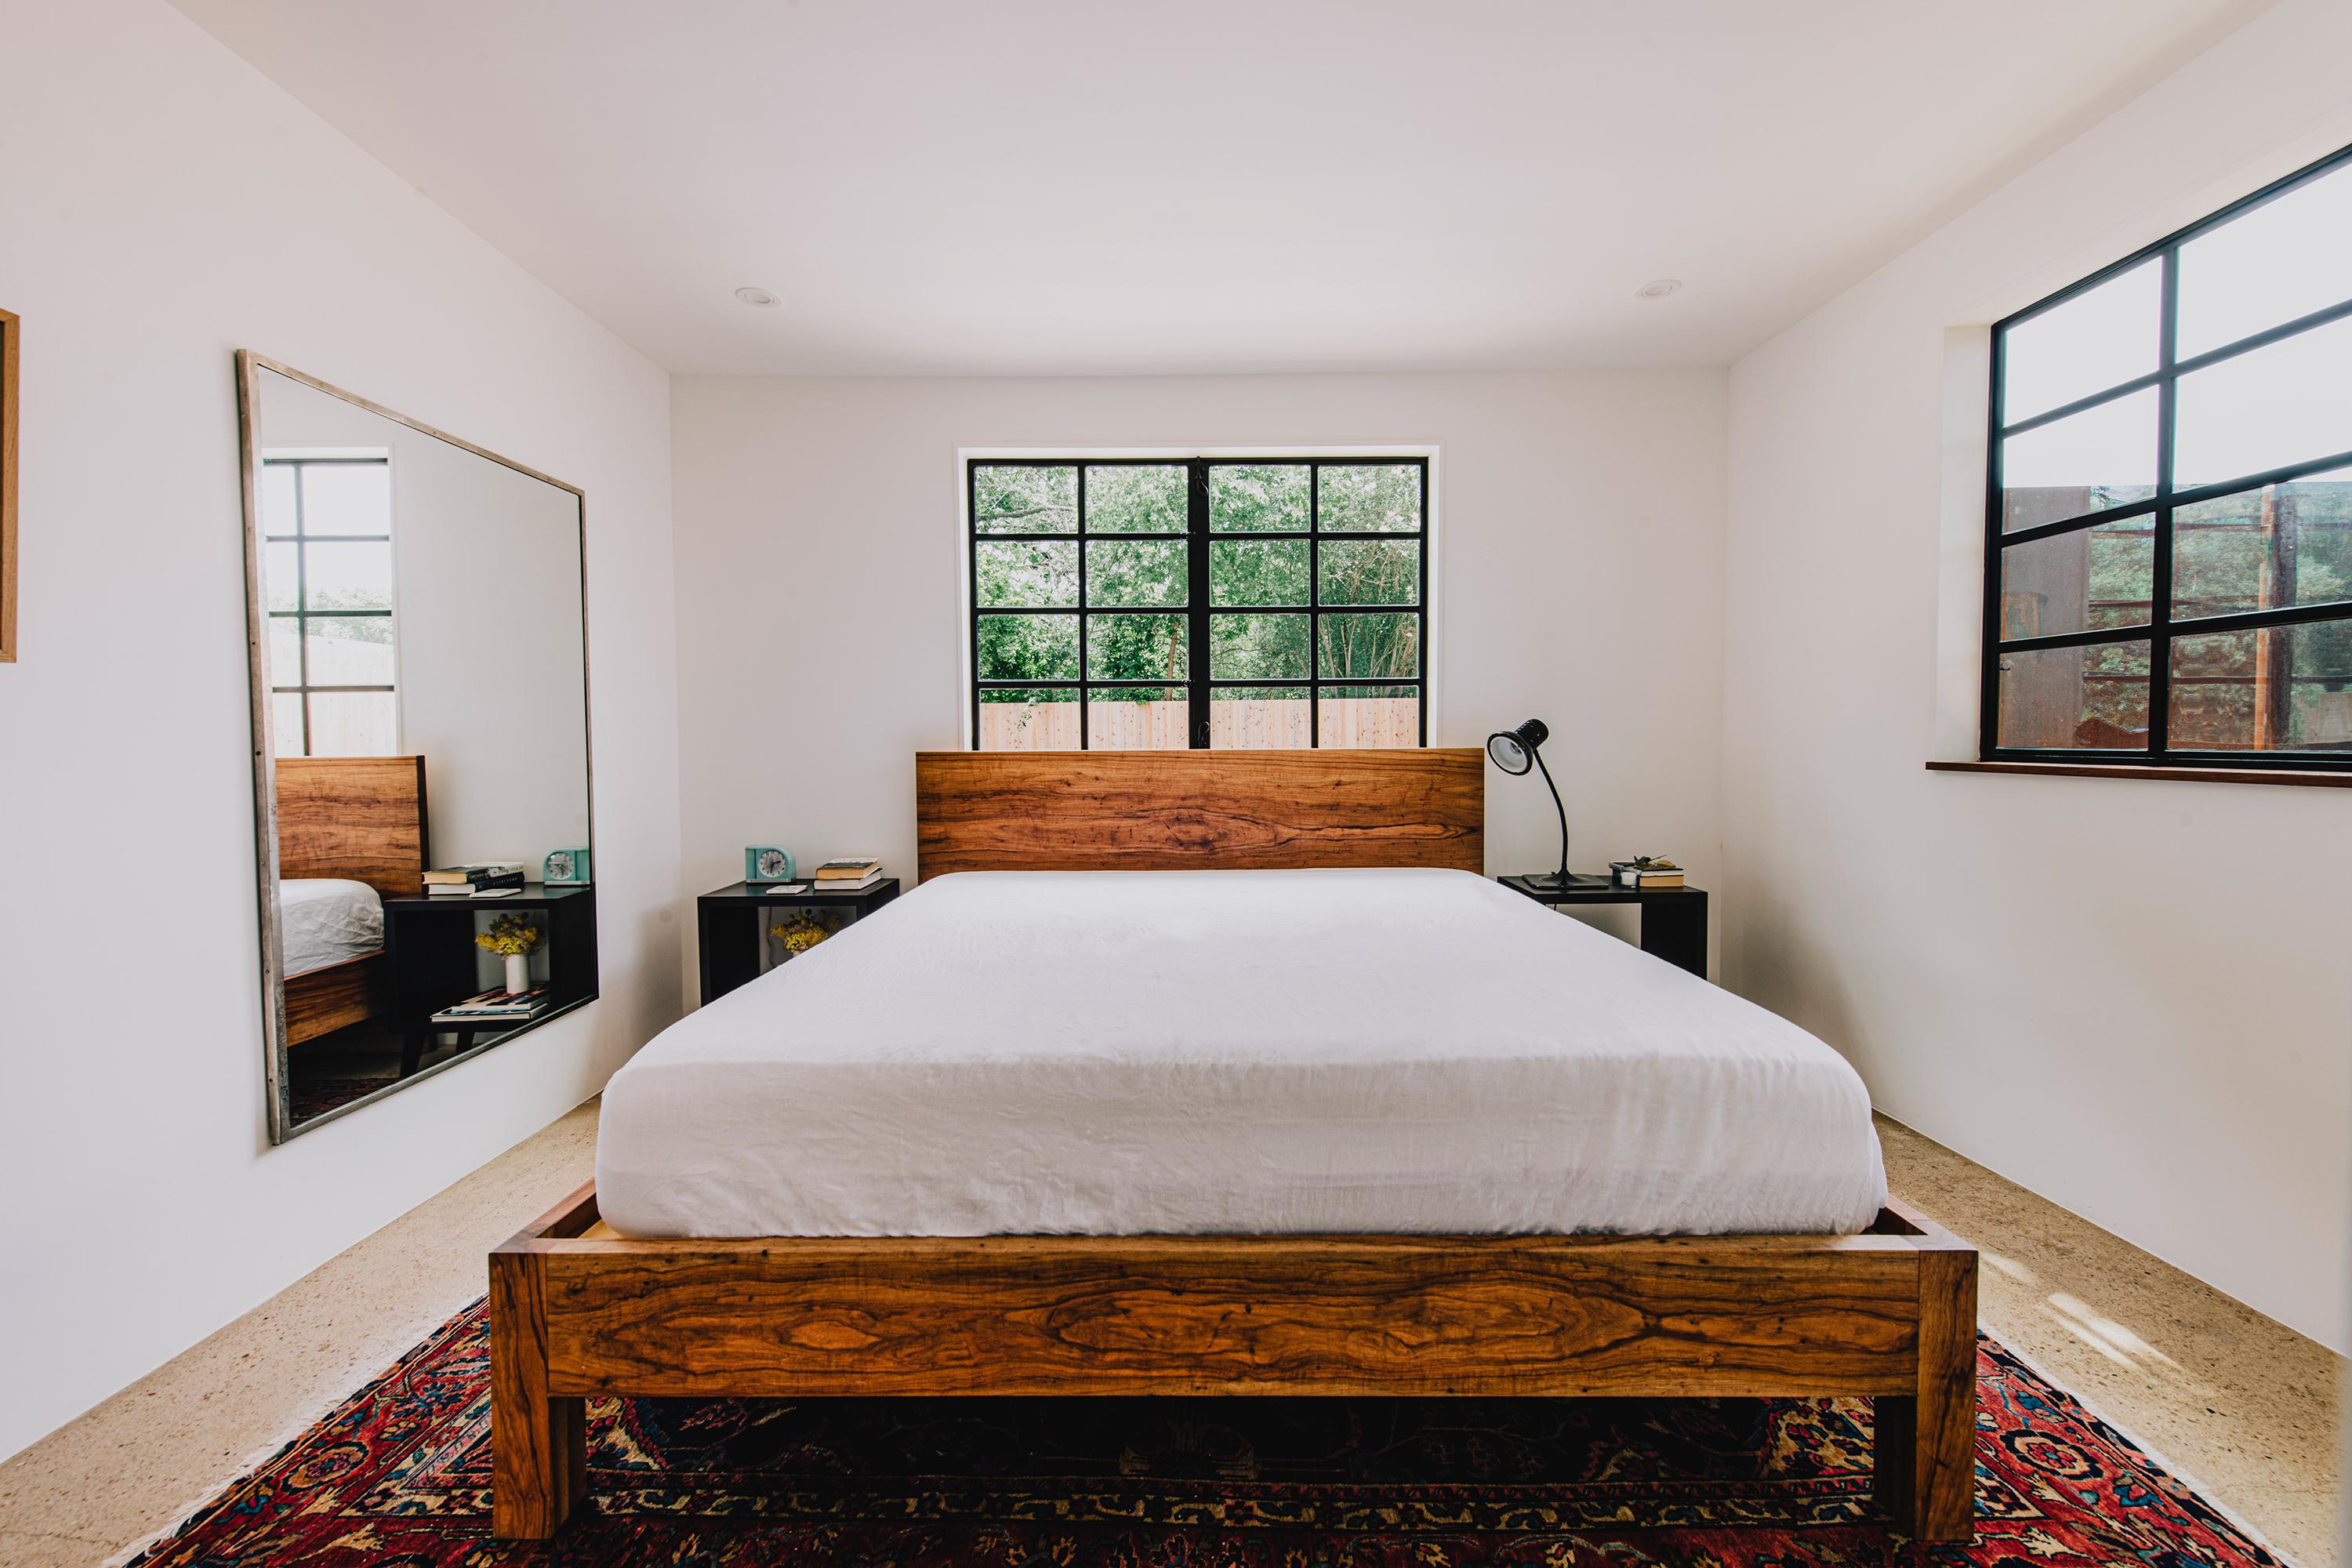 The Taylor bed is uncomplicated in its basic shape, the grain of the wooden frame gives a sense of natural depth. The luxury of this piece lays in the material used and the energy invested in its construction with solid slabs of American Pecan wood